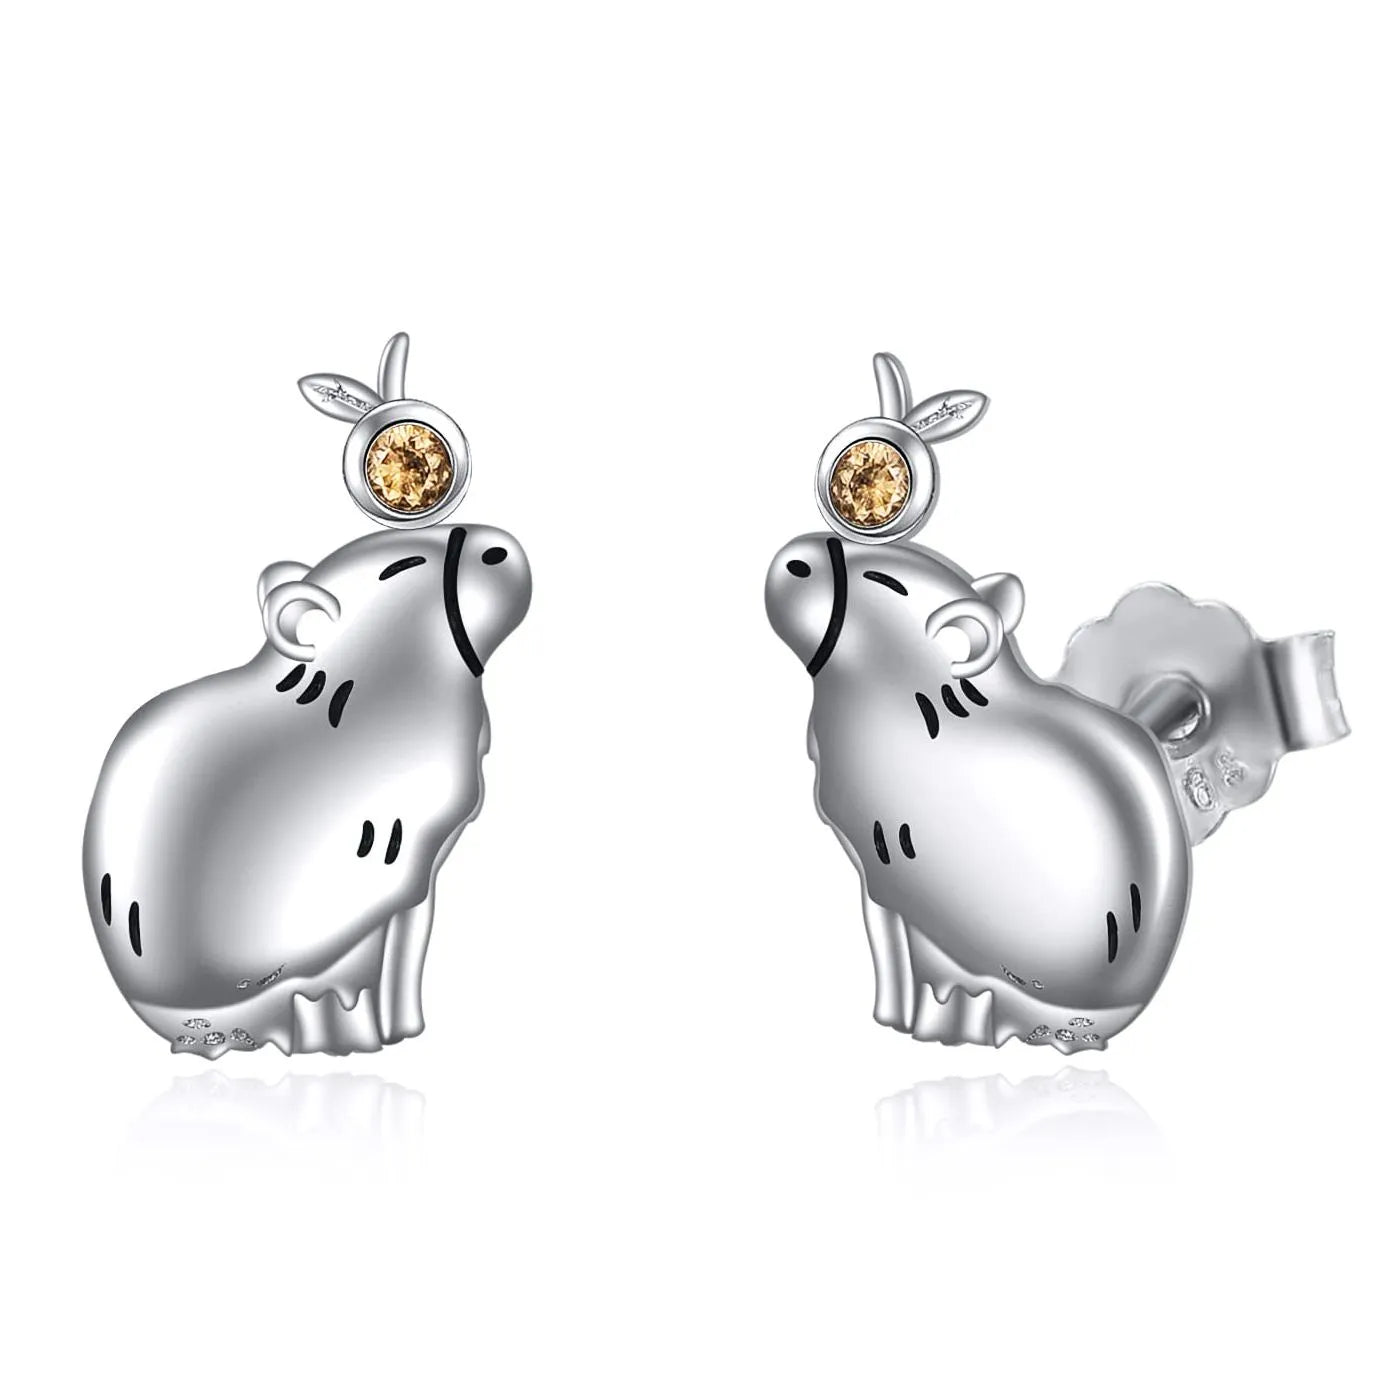 Harong New Capybara Earring Exquisite Fashion Cute Capybara Eat Orange Silver Color Earring for Girl Woman Jewelry Party Gift